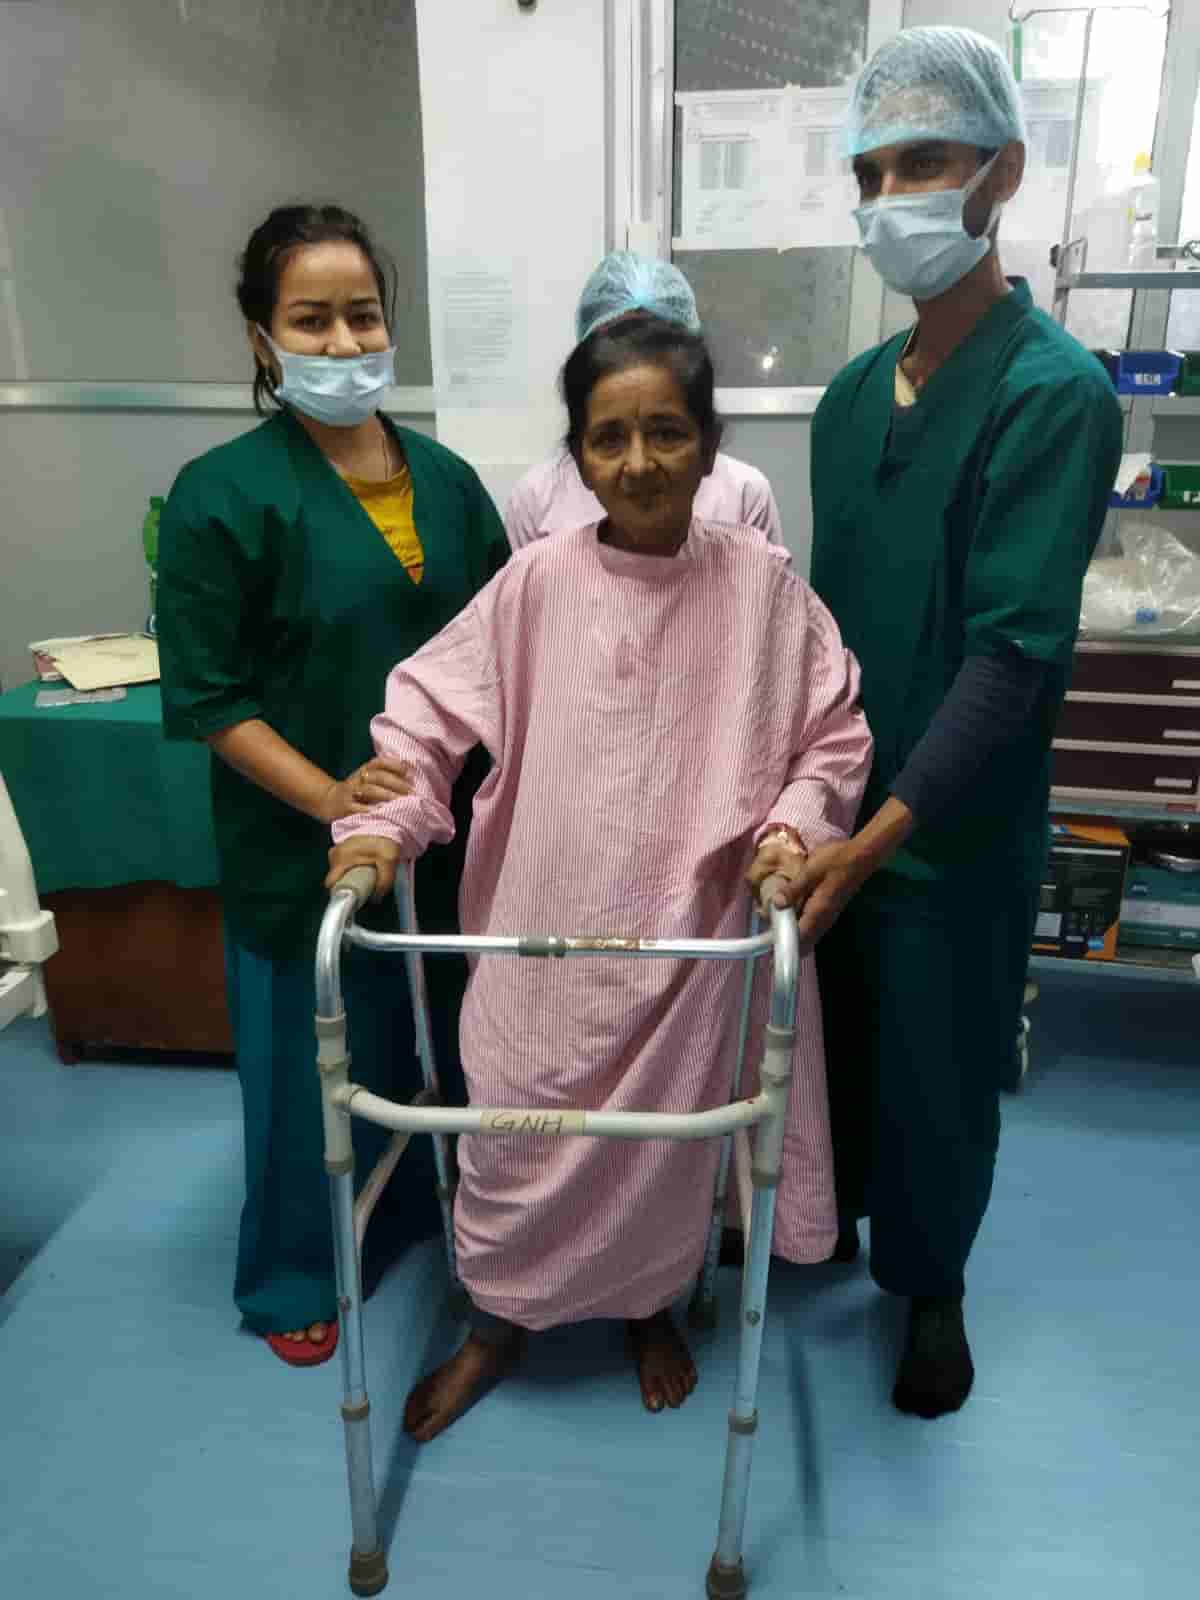 Hip Joint Replacement Surgery For Senior Citizens Sustaining Fracture Neck of Femur